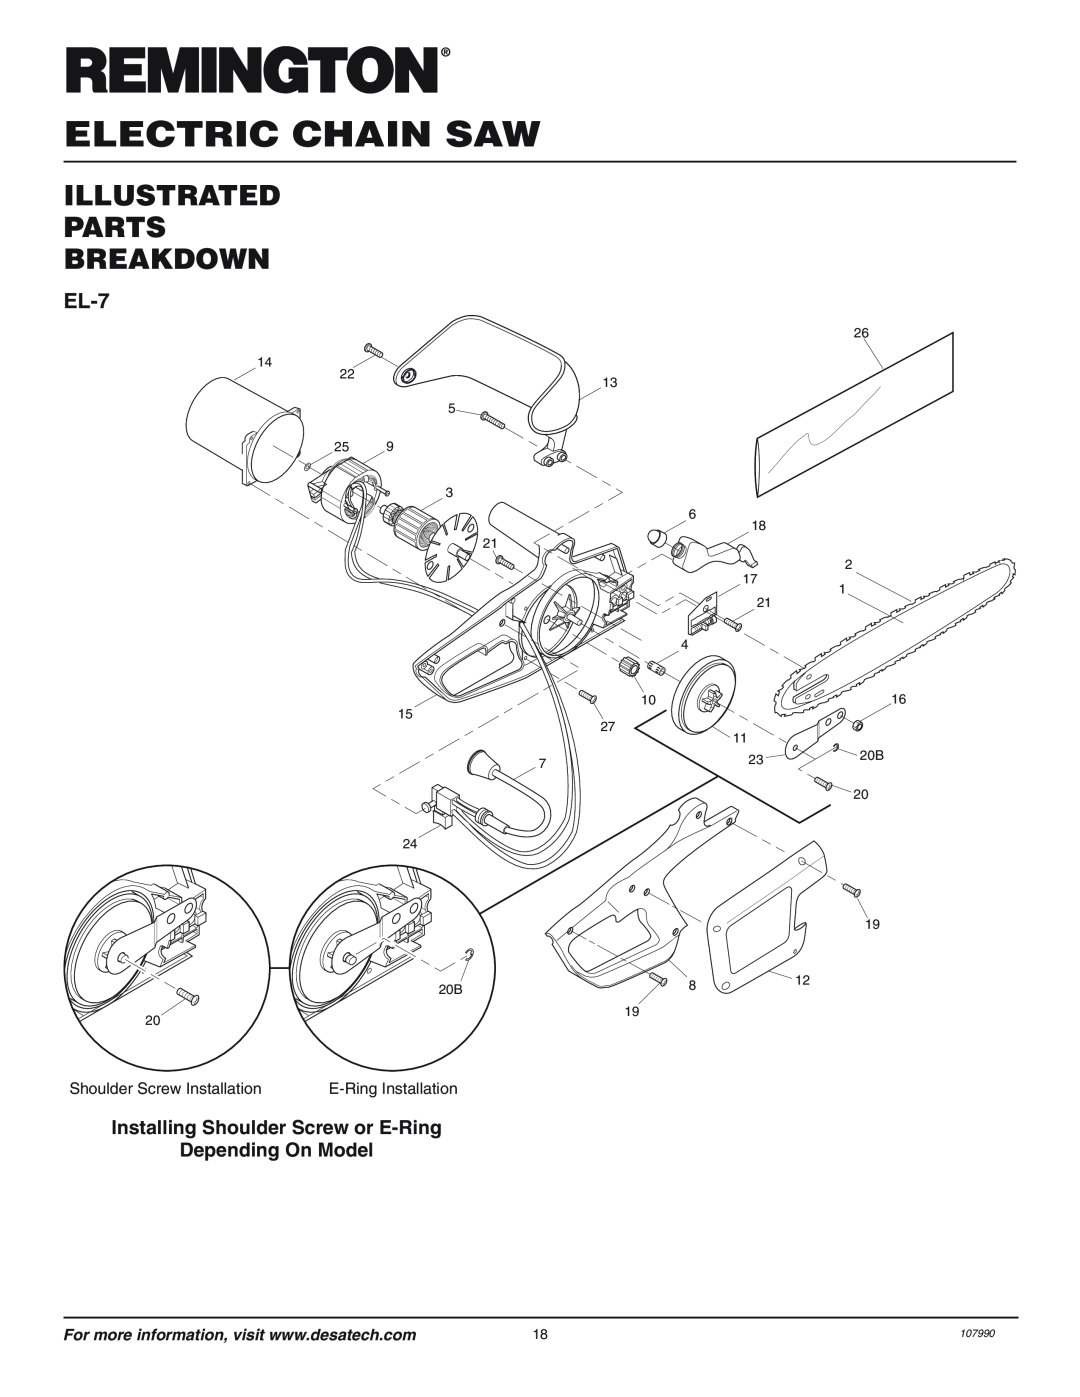 Remington EL-7, Electric Chain Saw, Illustrated Parts Breakdown, Installing Shoulder Screw or E-Ring Depending On Model 